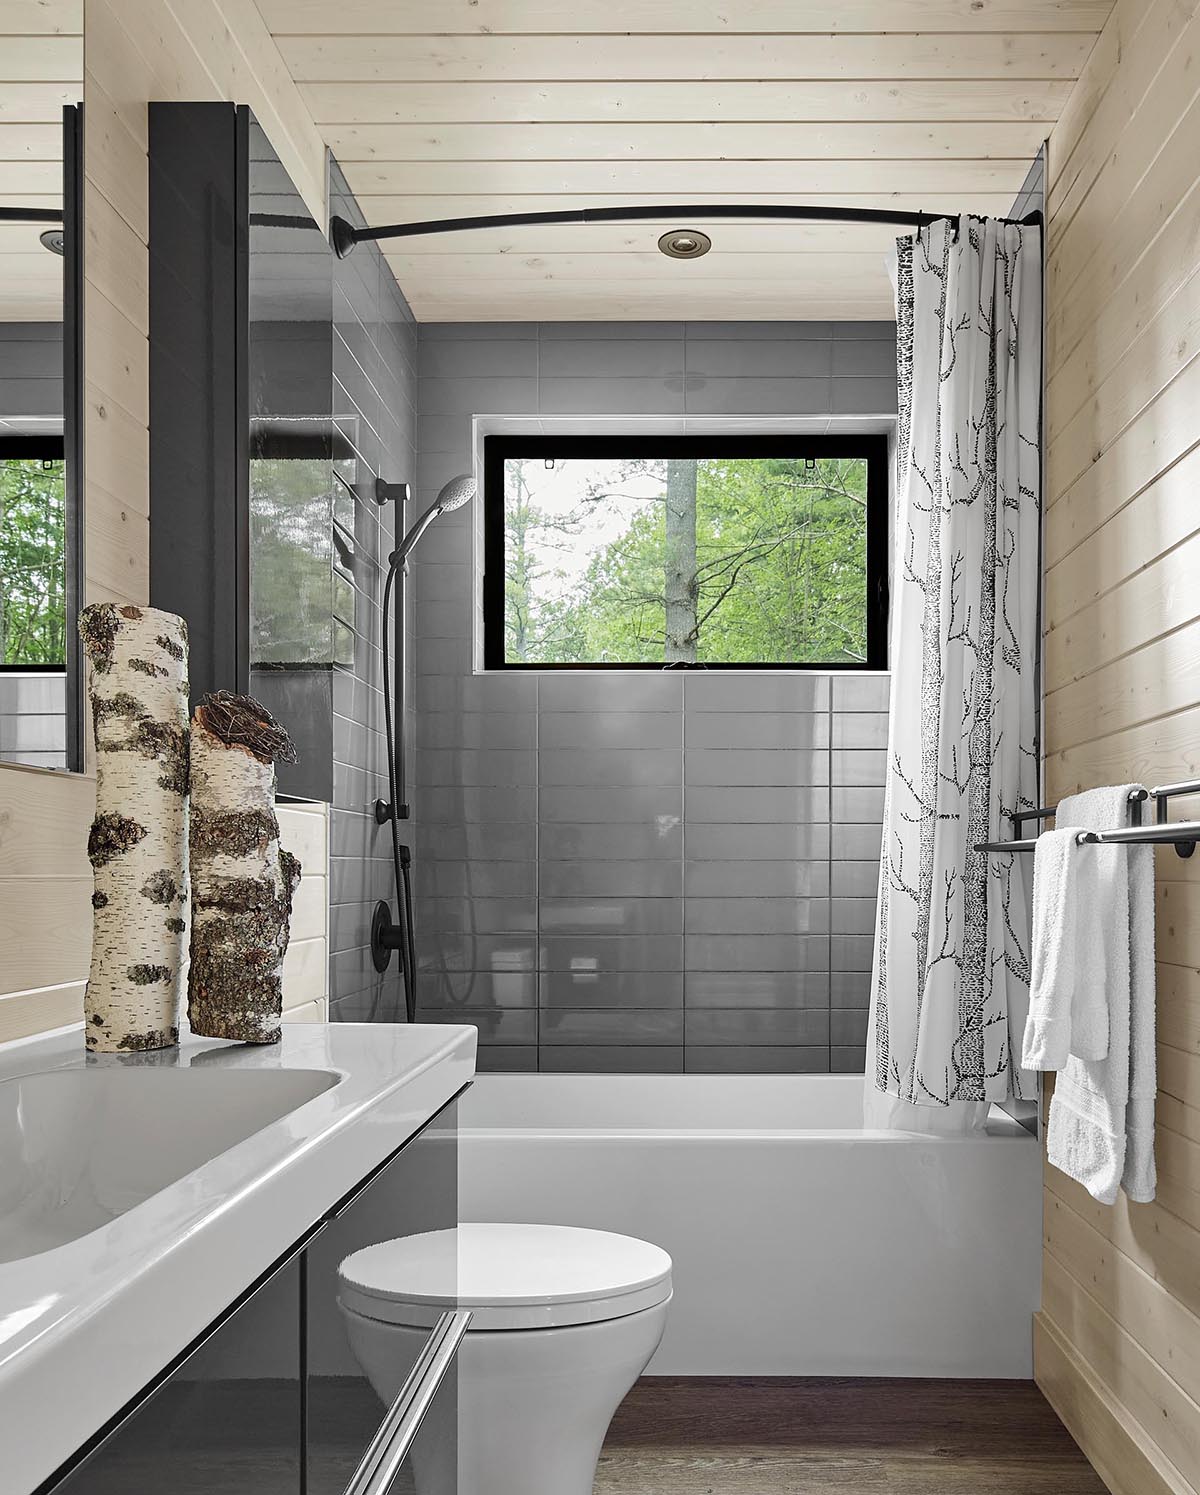 A modern gray and wood bathroom with black and white accents.